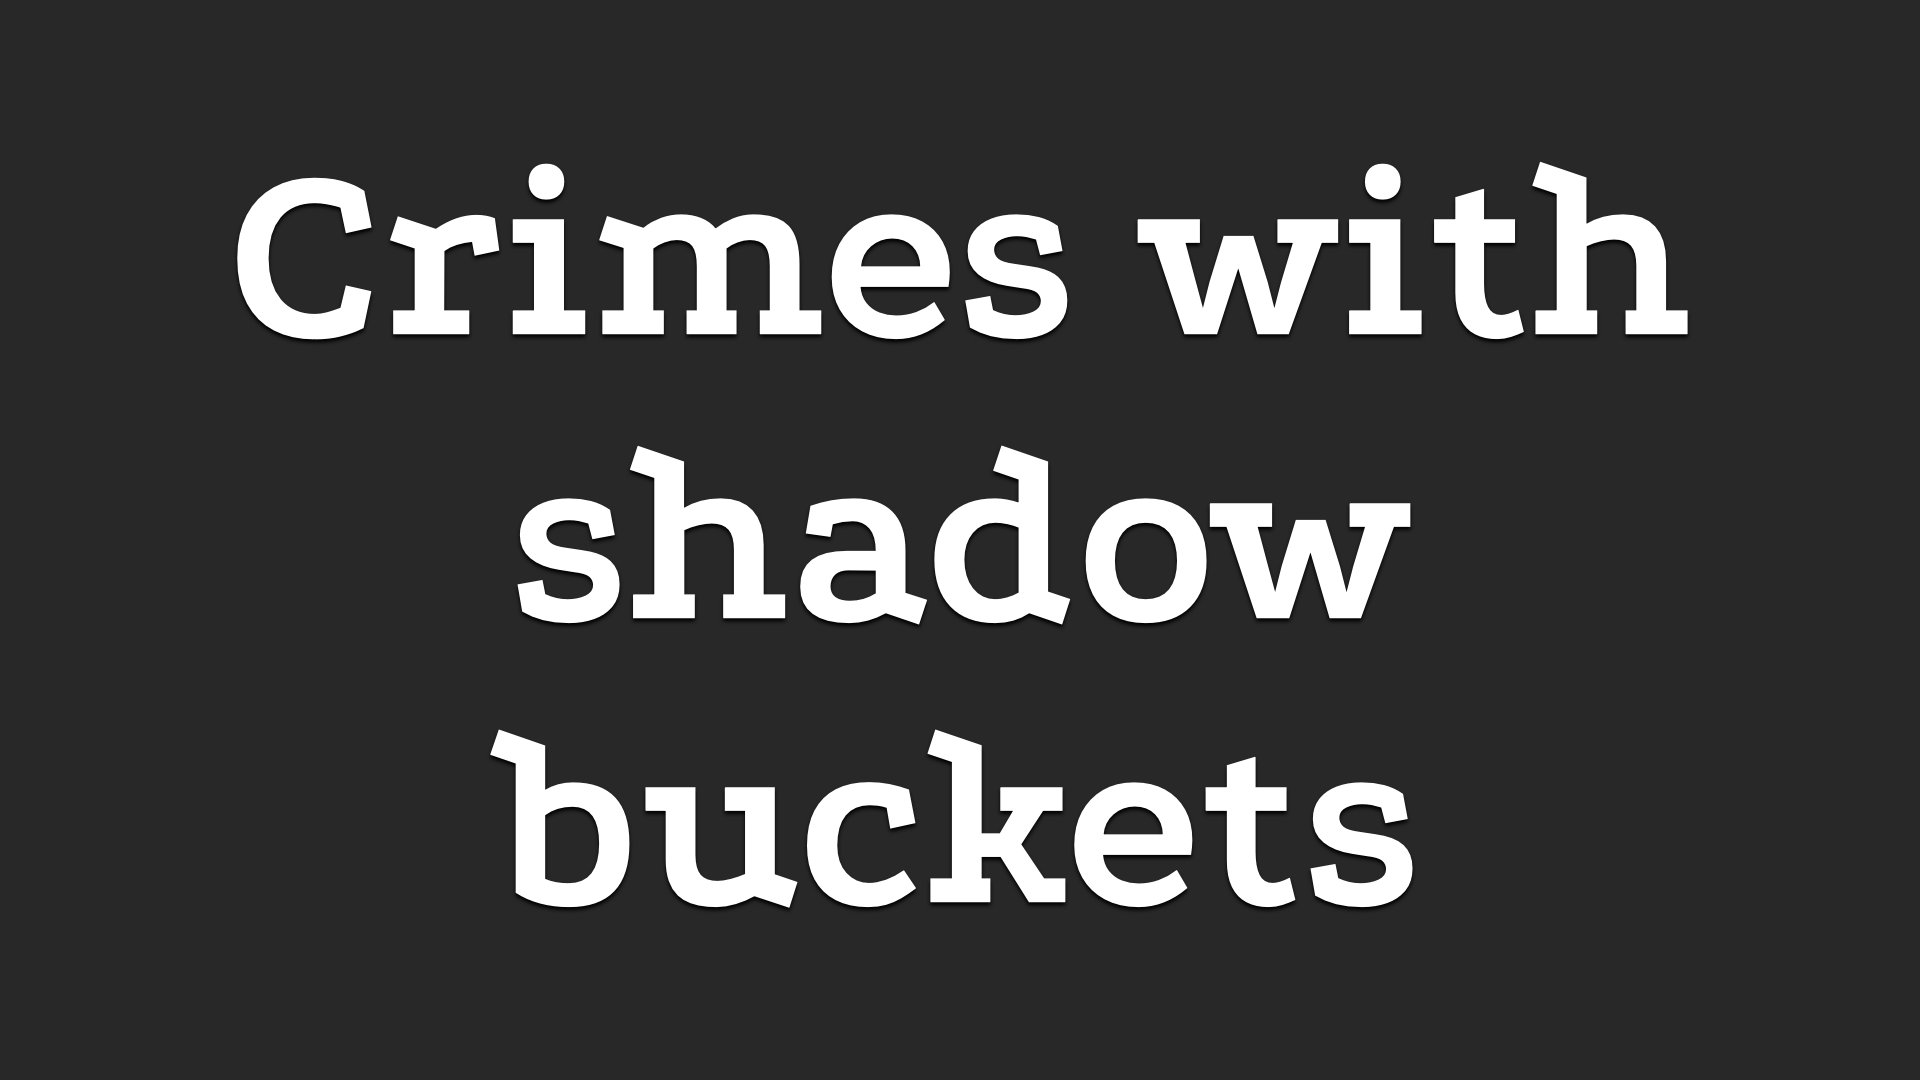 Text in giant letters: 'Crimes with shadow buckets'